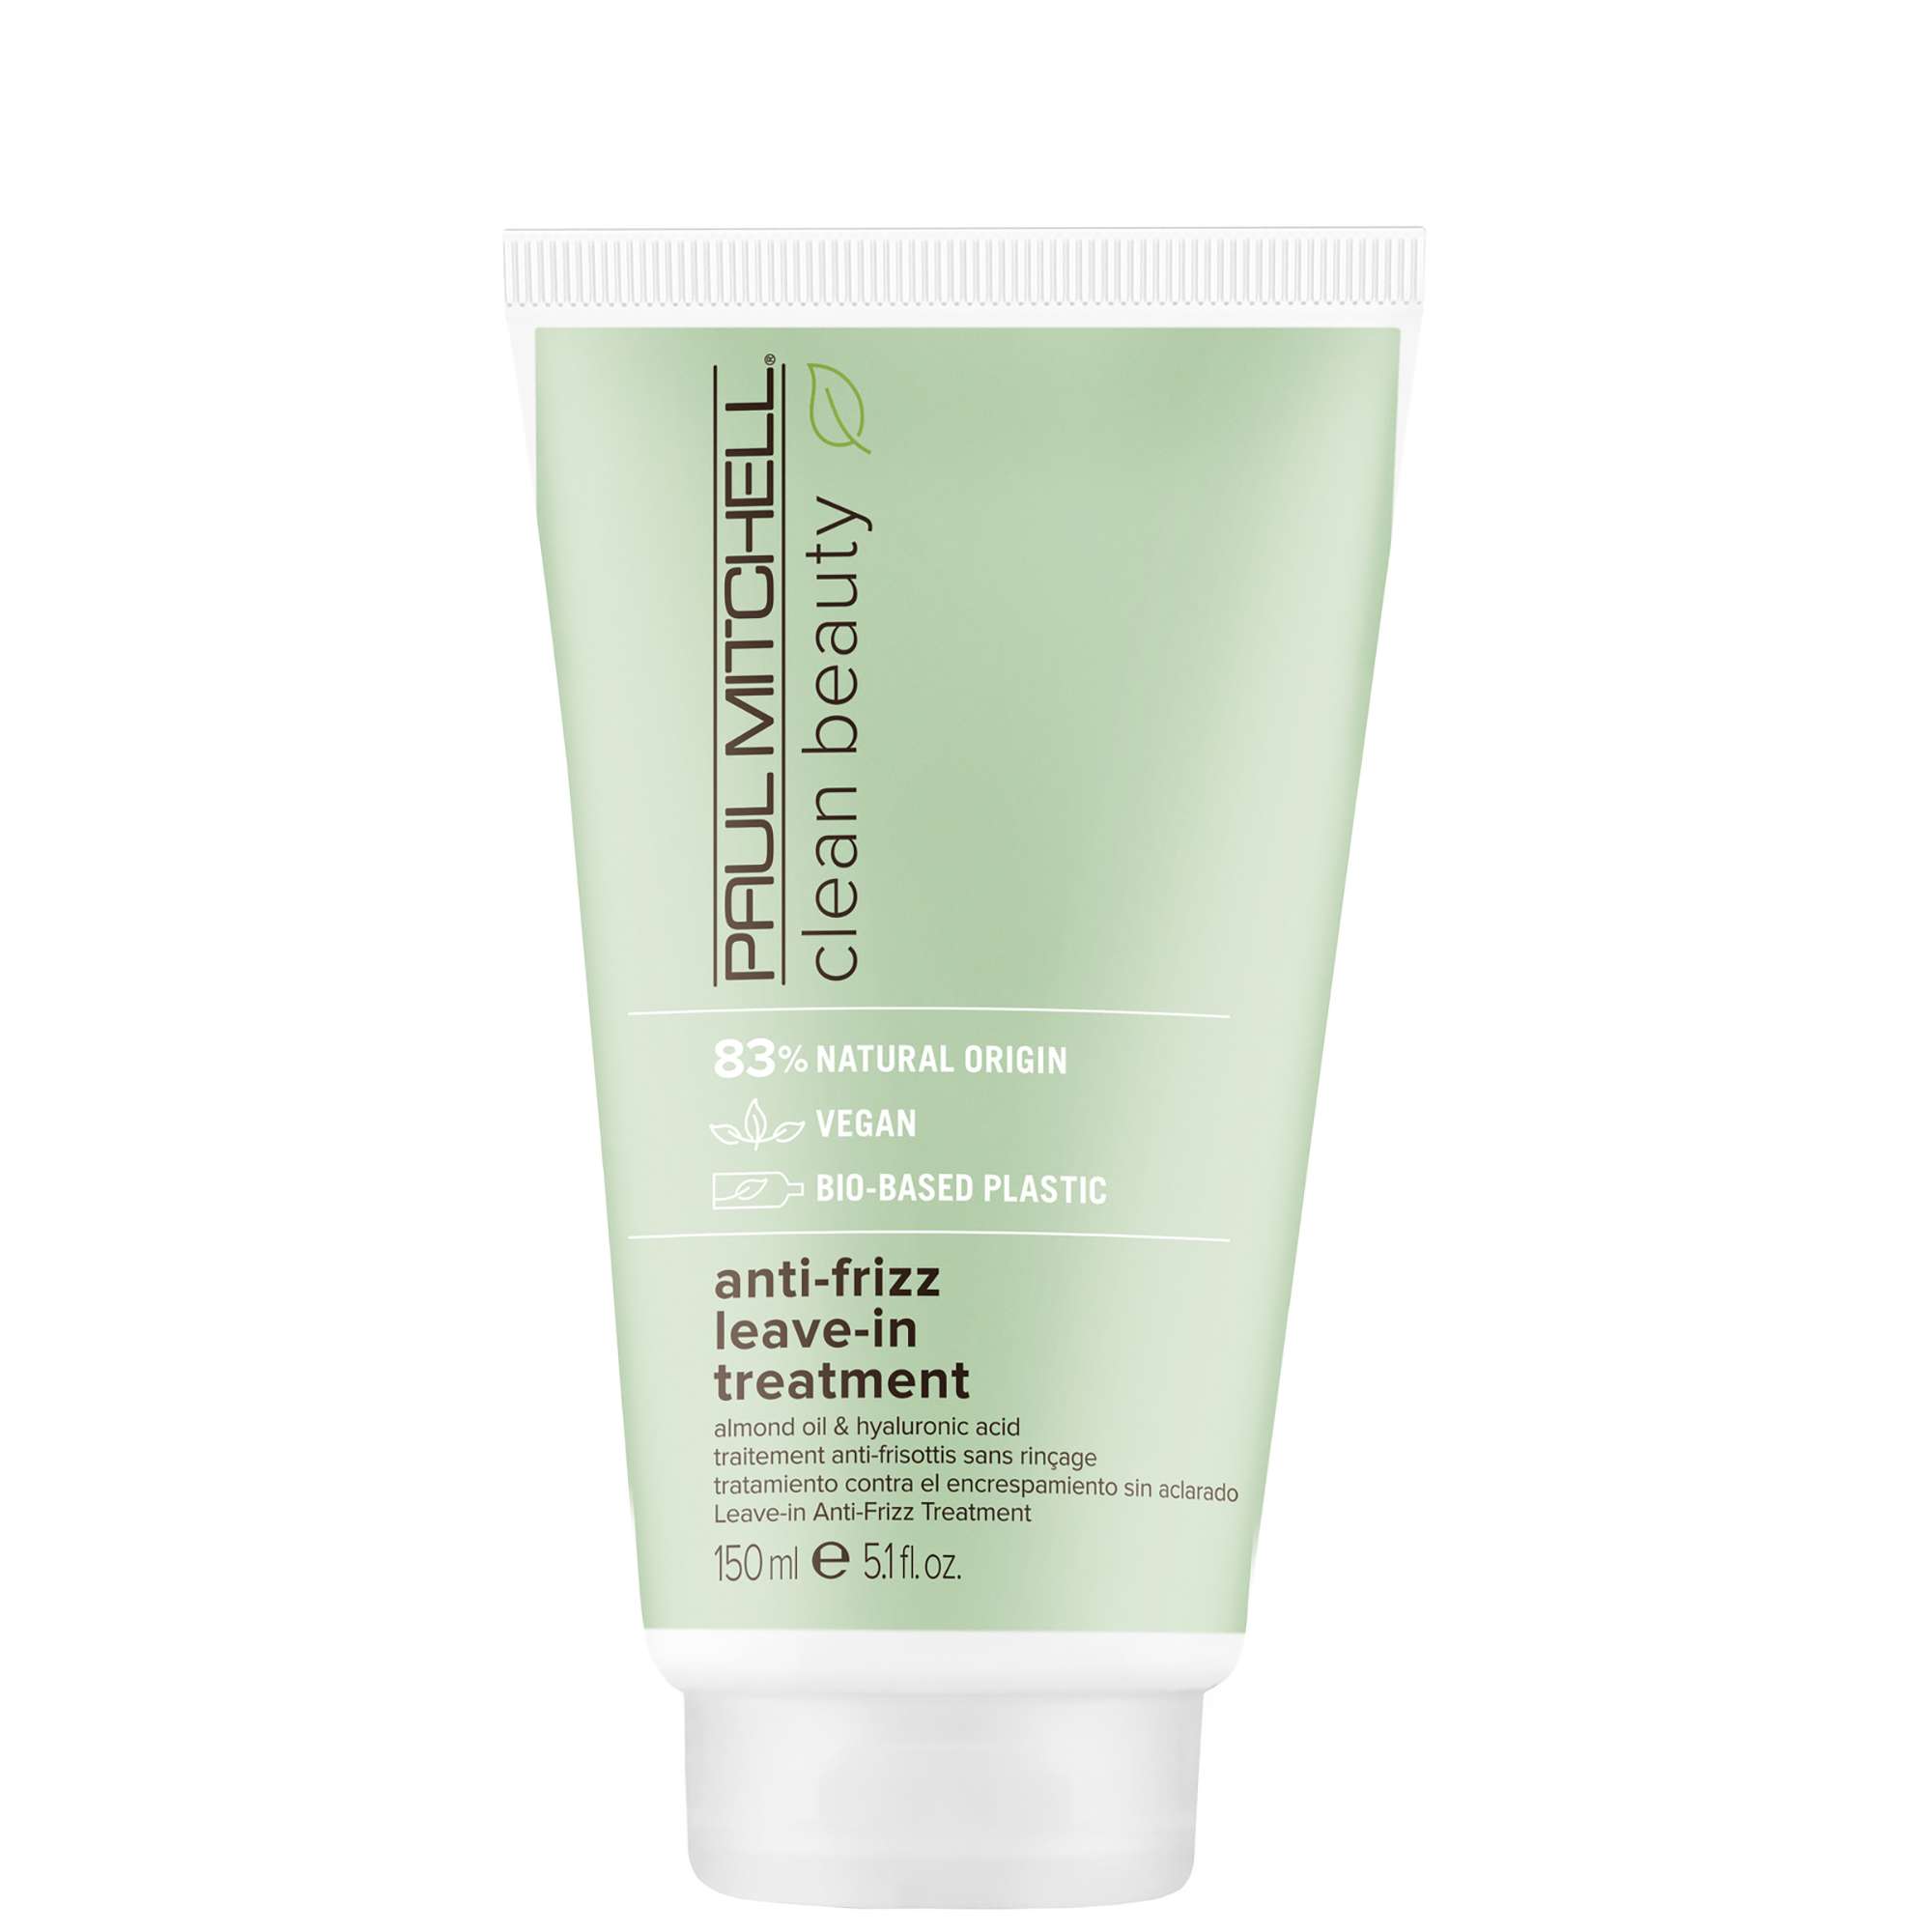 Image of Paul Mitchell Clean Beauty Anti-frizz Leave-In Treatment 150ml